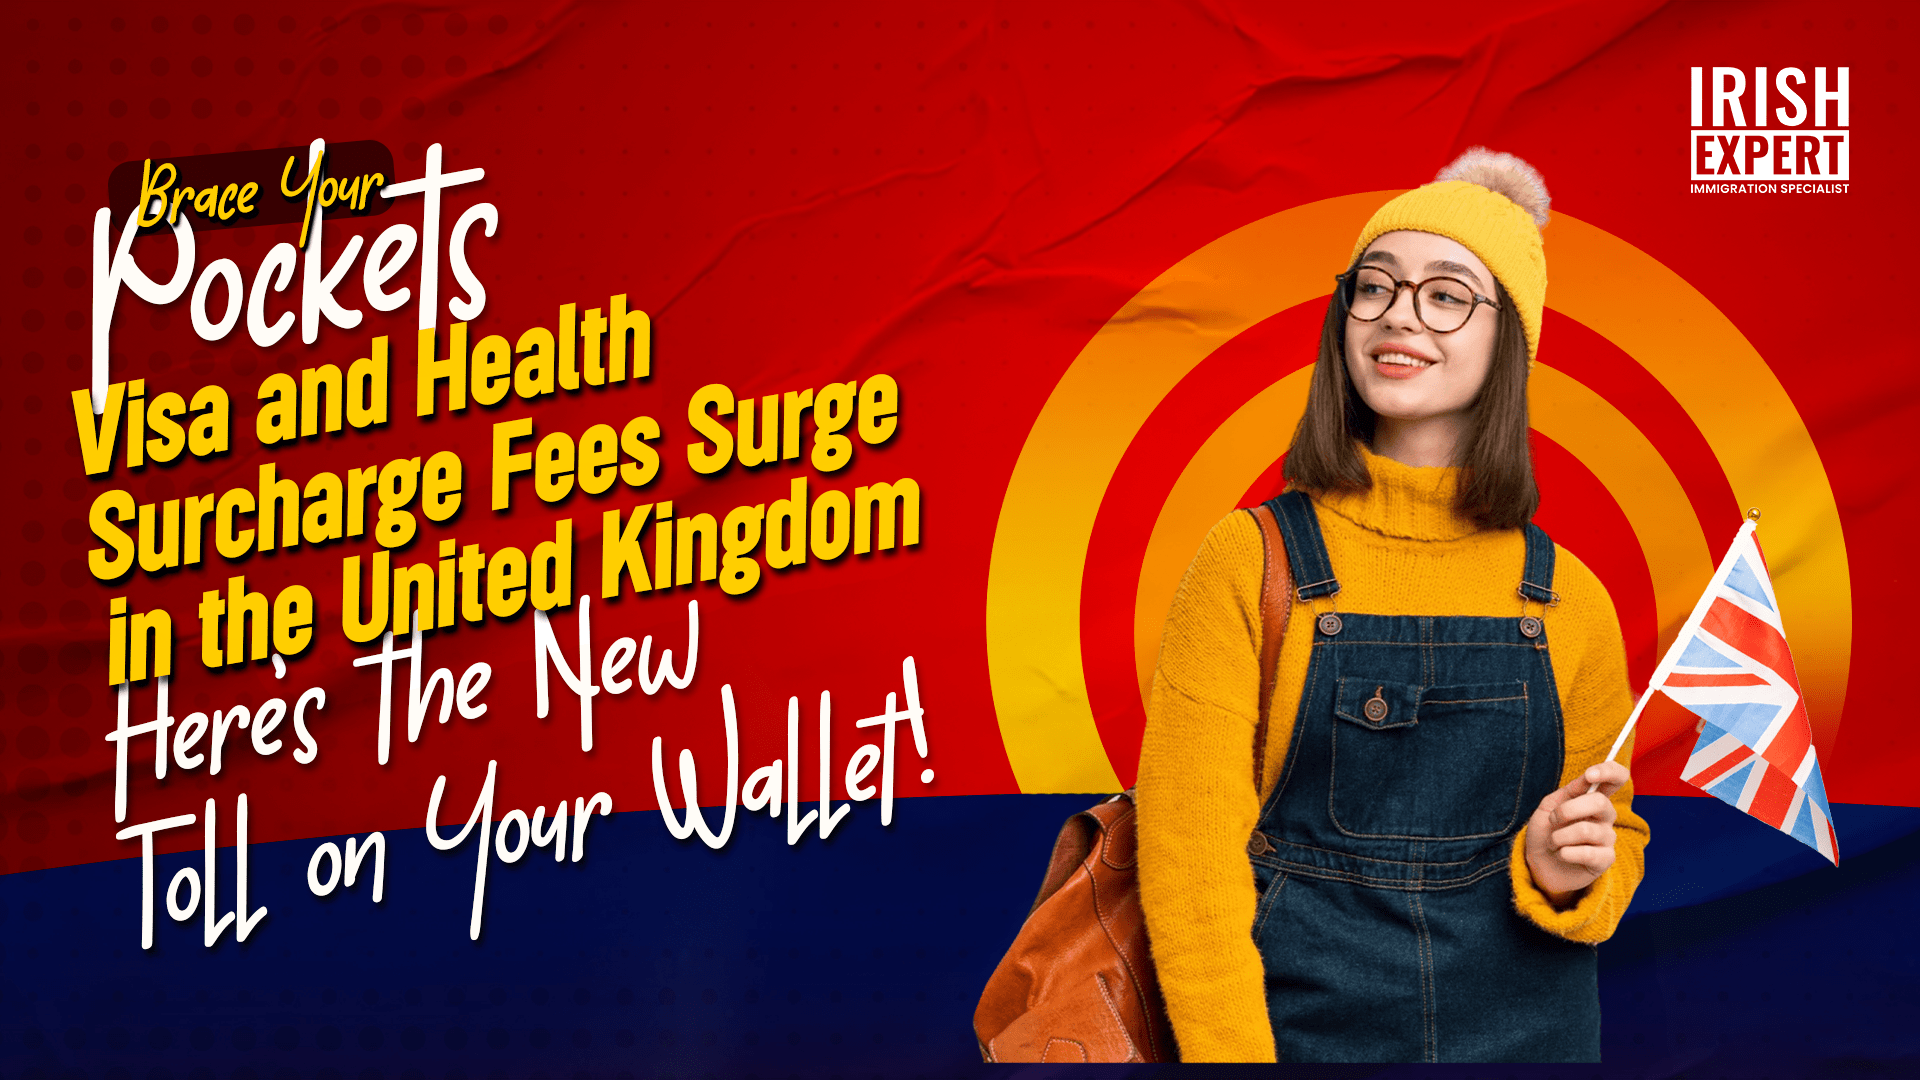 Brace Your Pockets: Visa and Health Surcharge Fees Surge in the UK- Here’s the New Toll on Your Wallet!